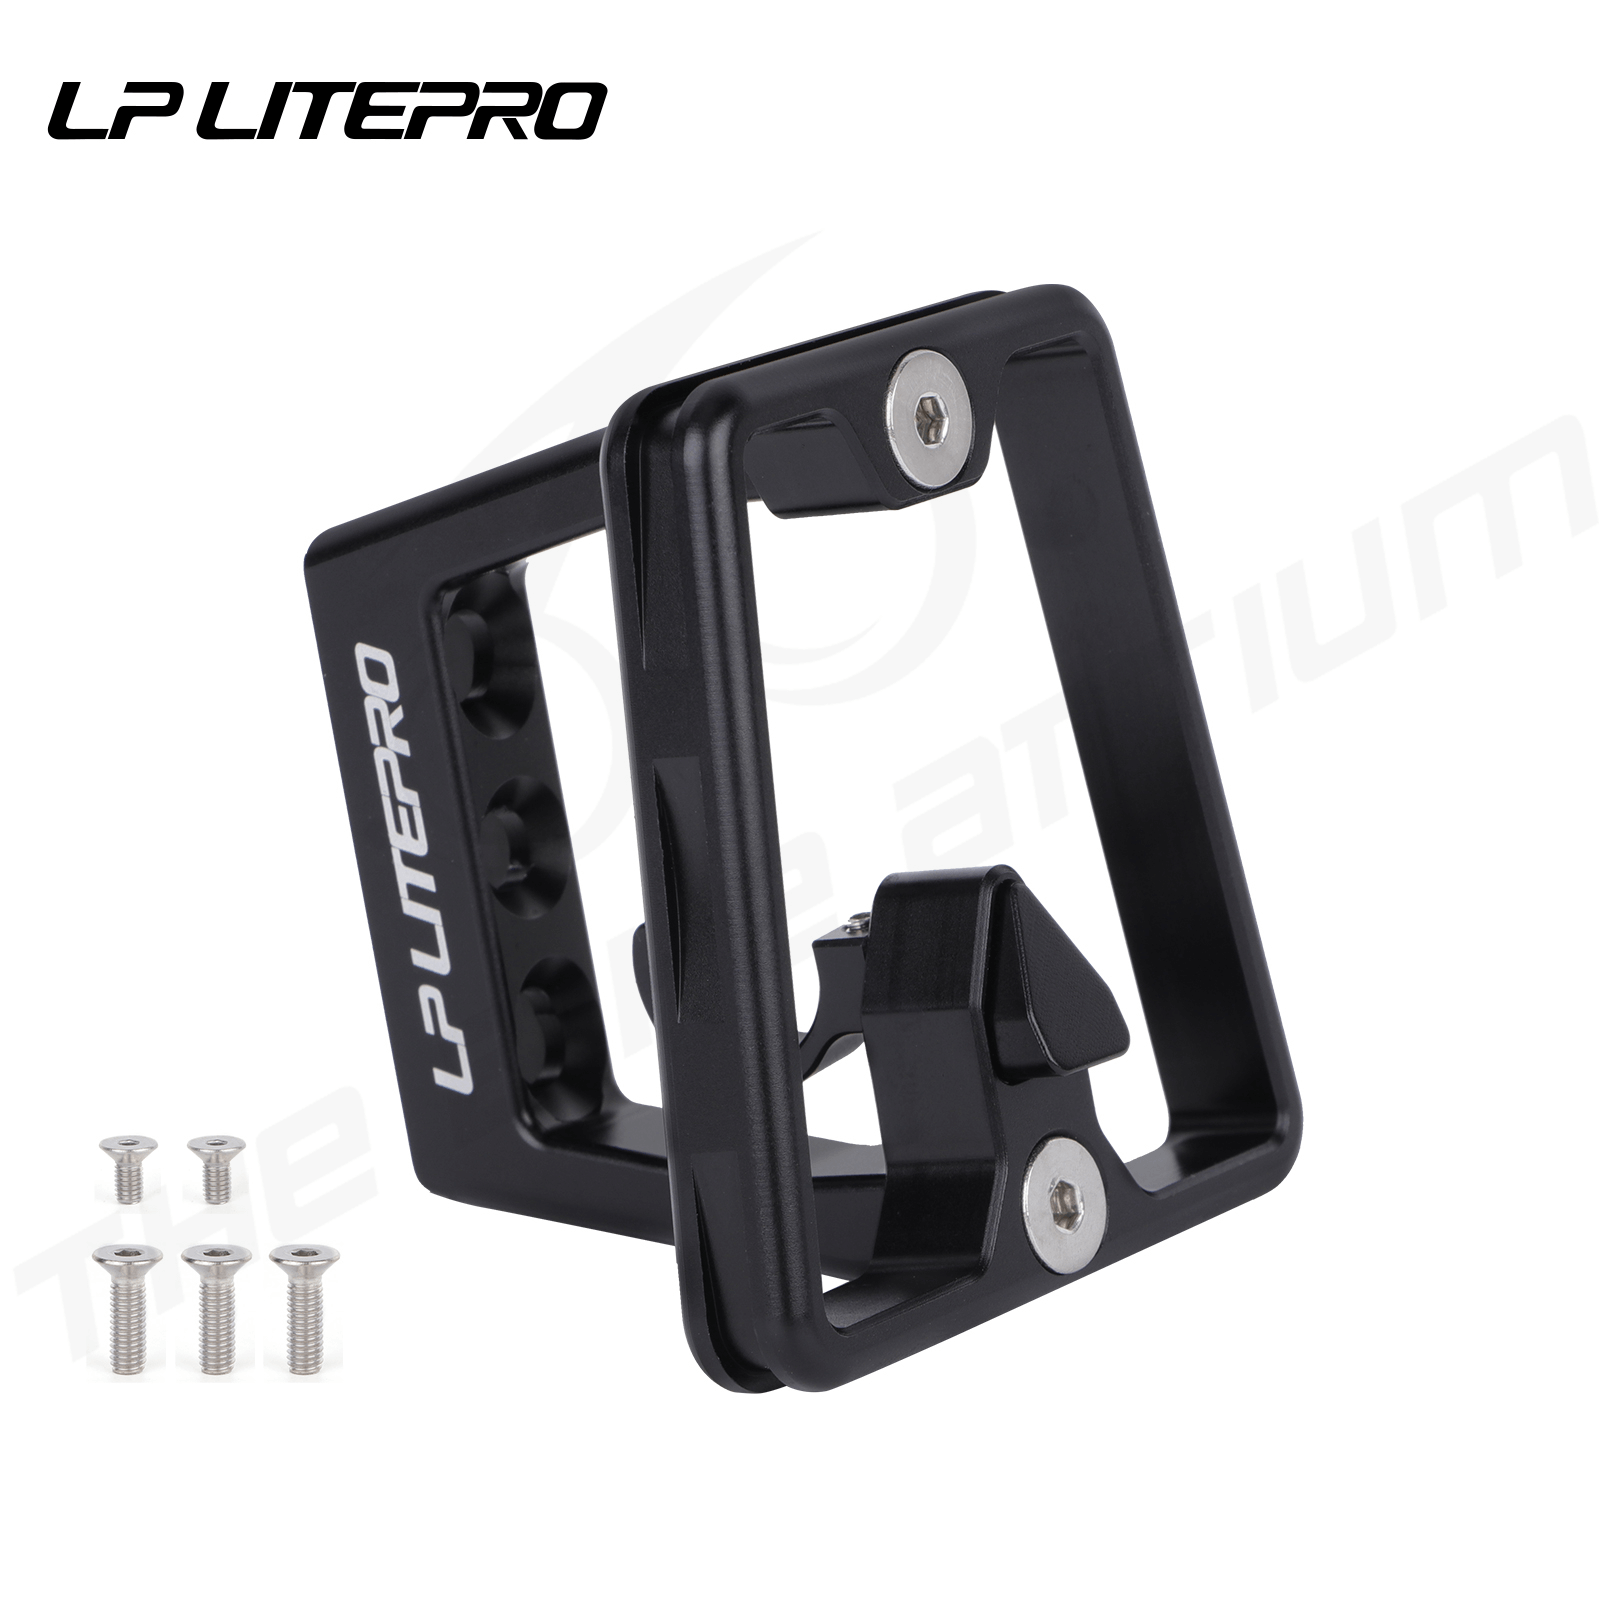 Litepro 3 Holes Front Block Carrier for Foldable Bicycles